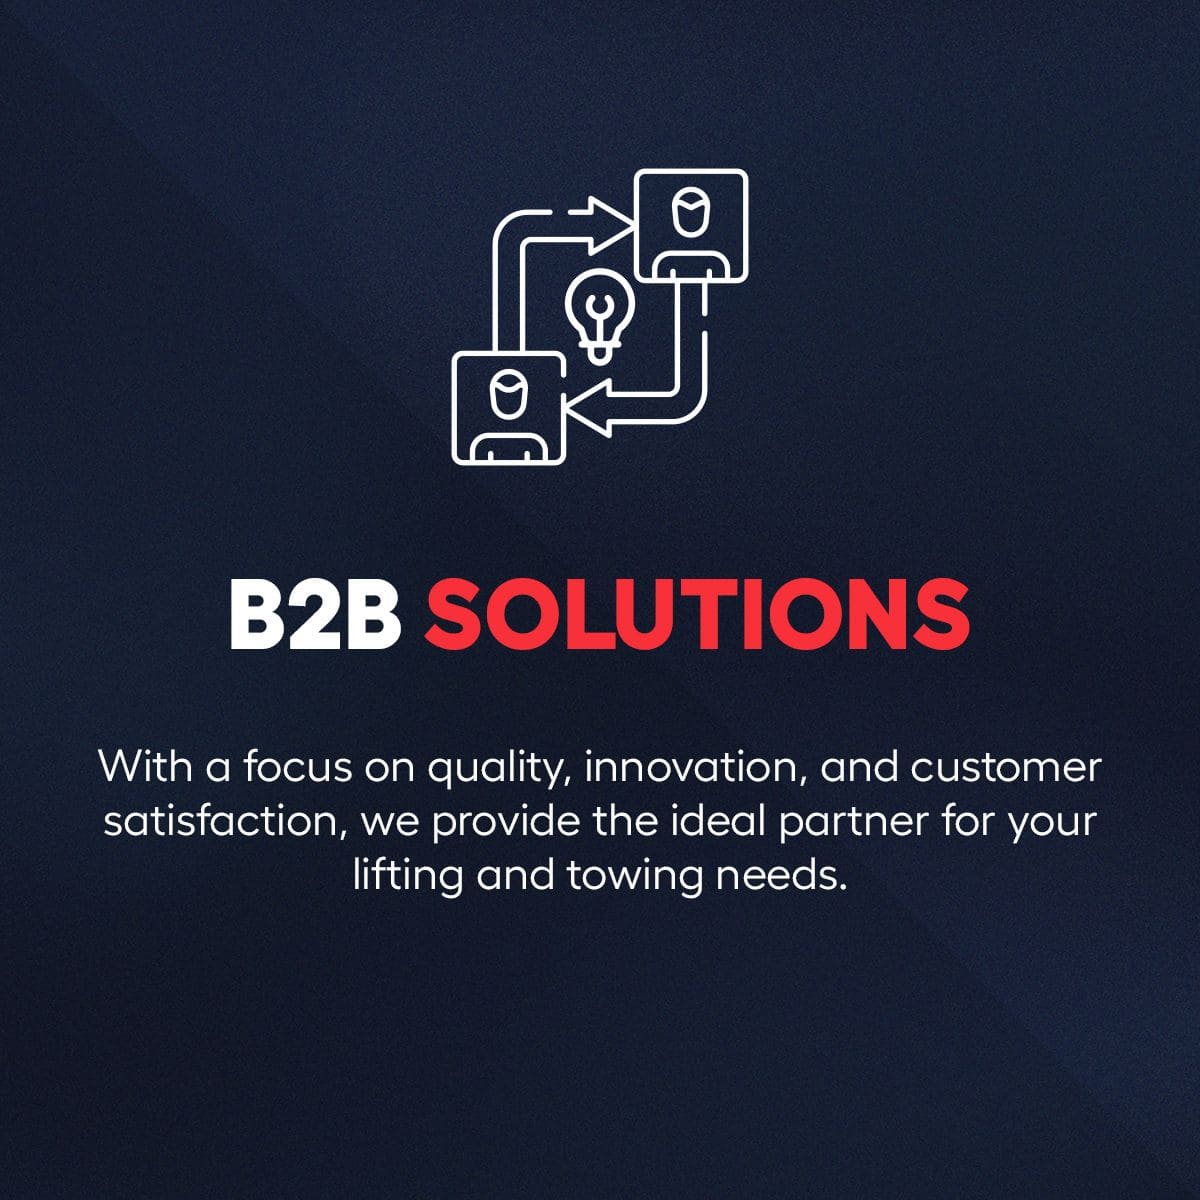 B2B Solutions Infographic